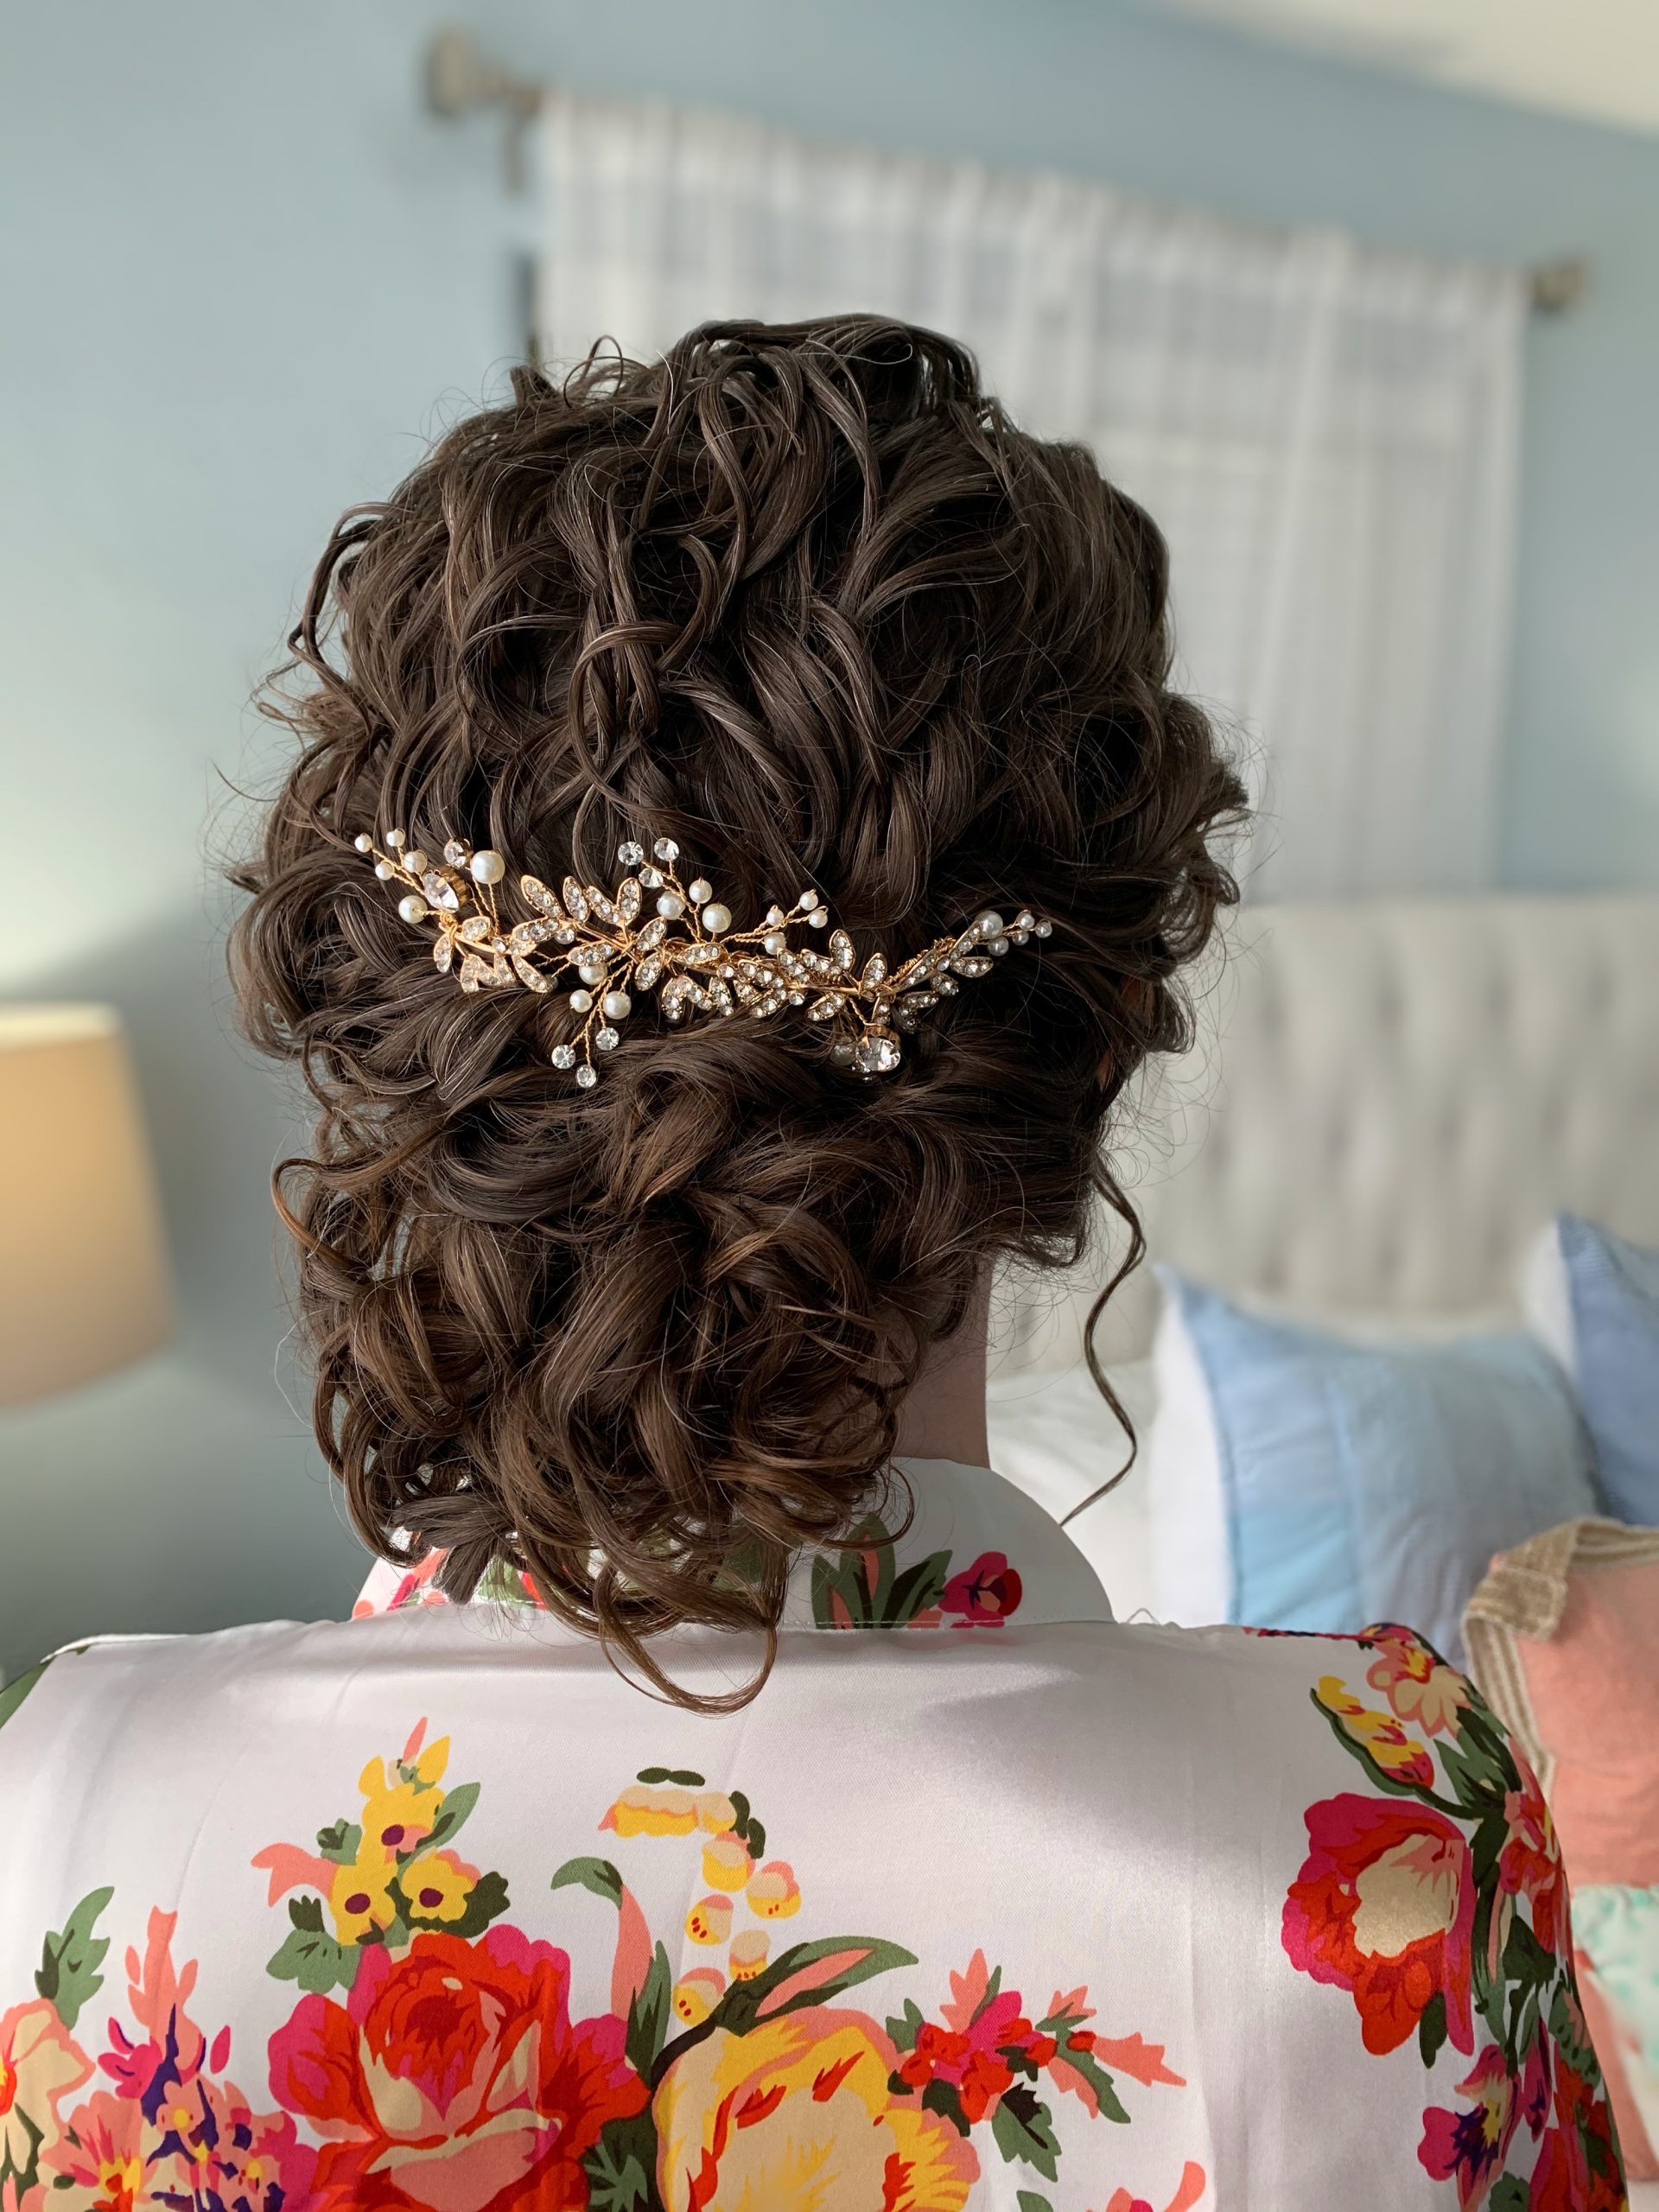 Curly Hair Bridal Style Accessory Updo